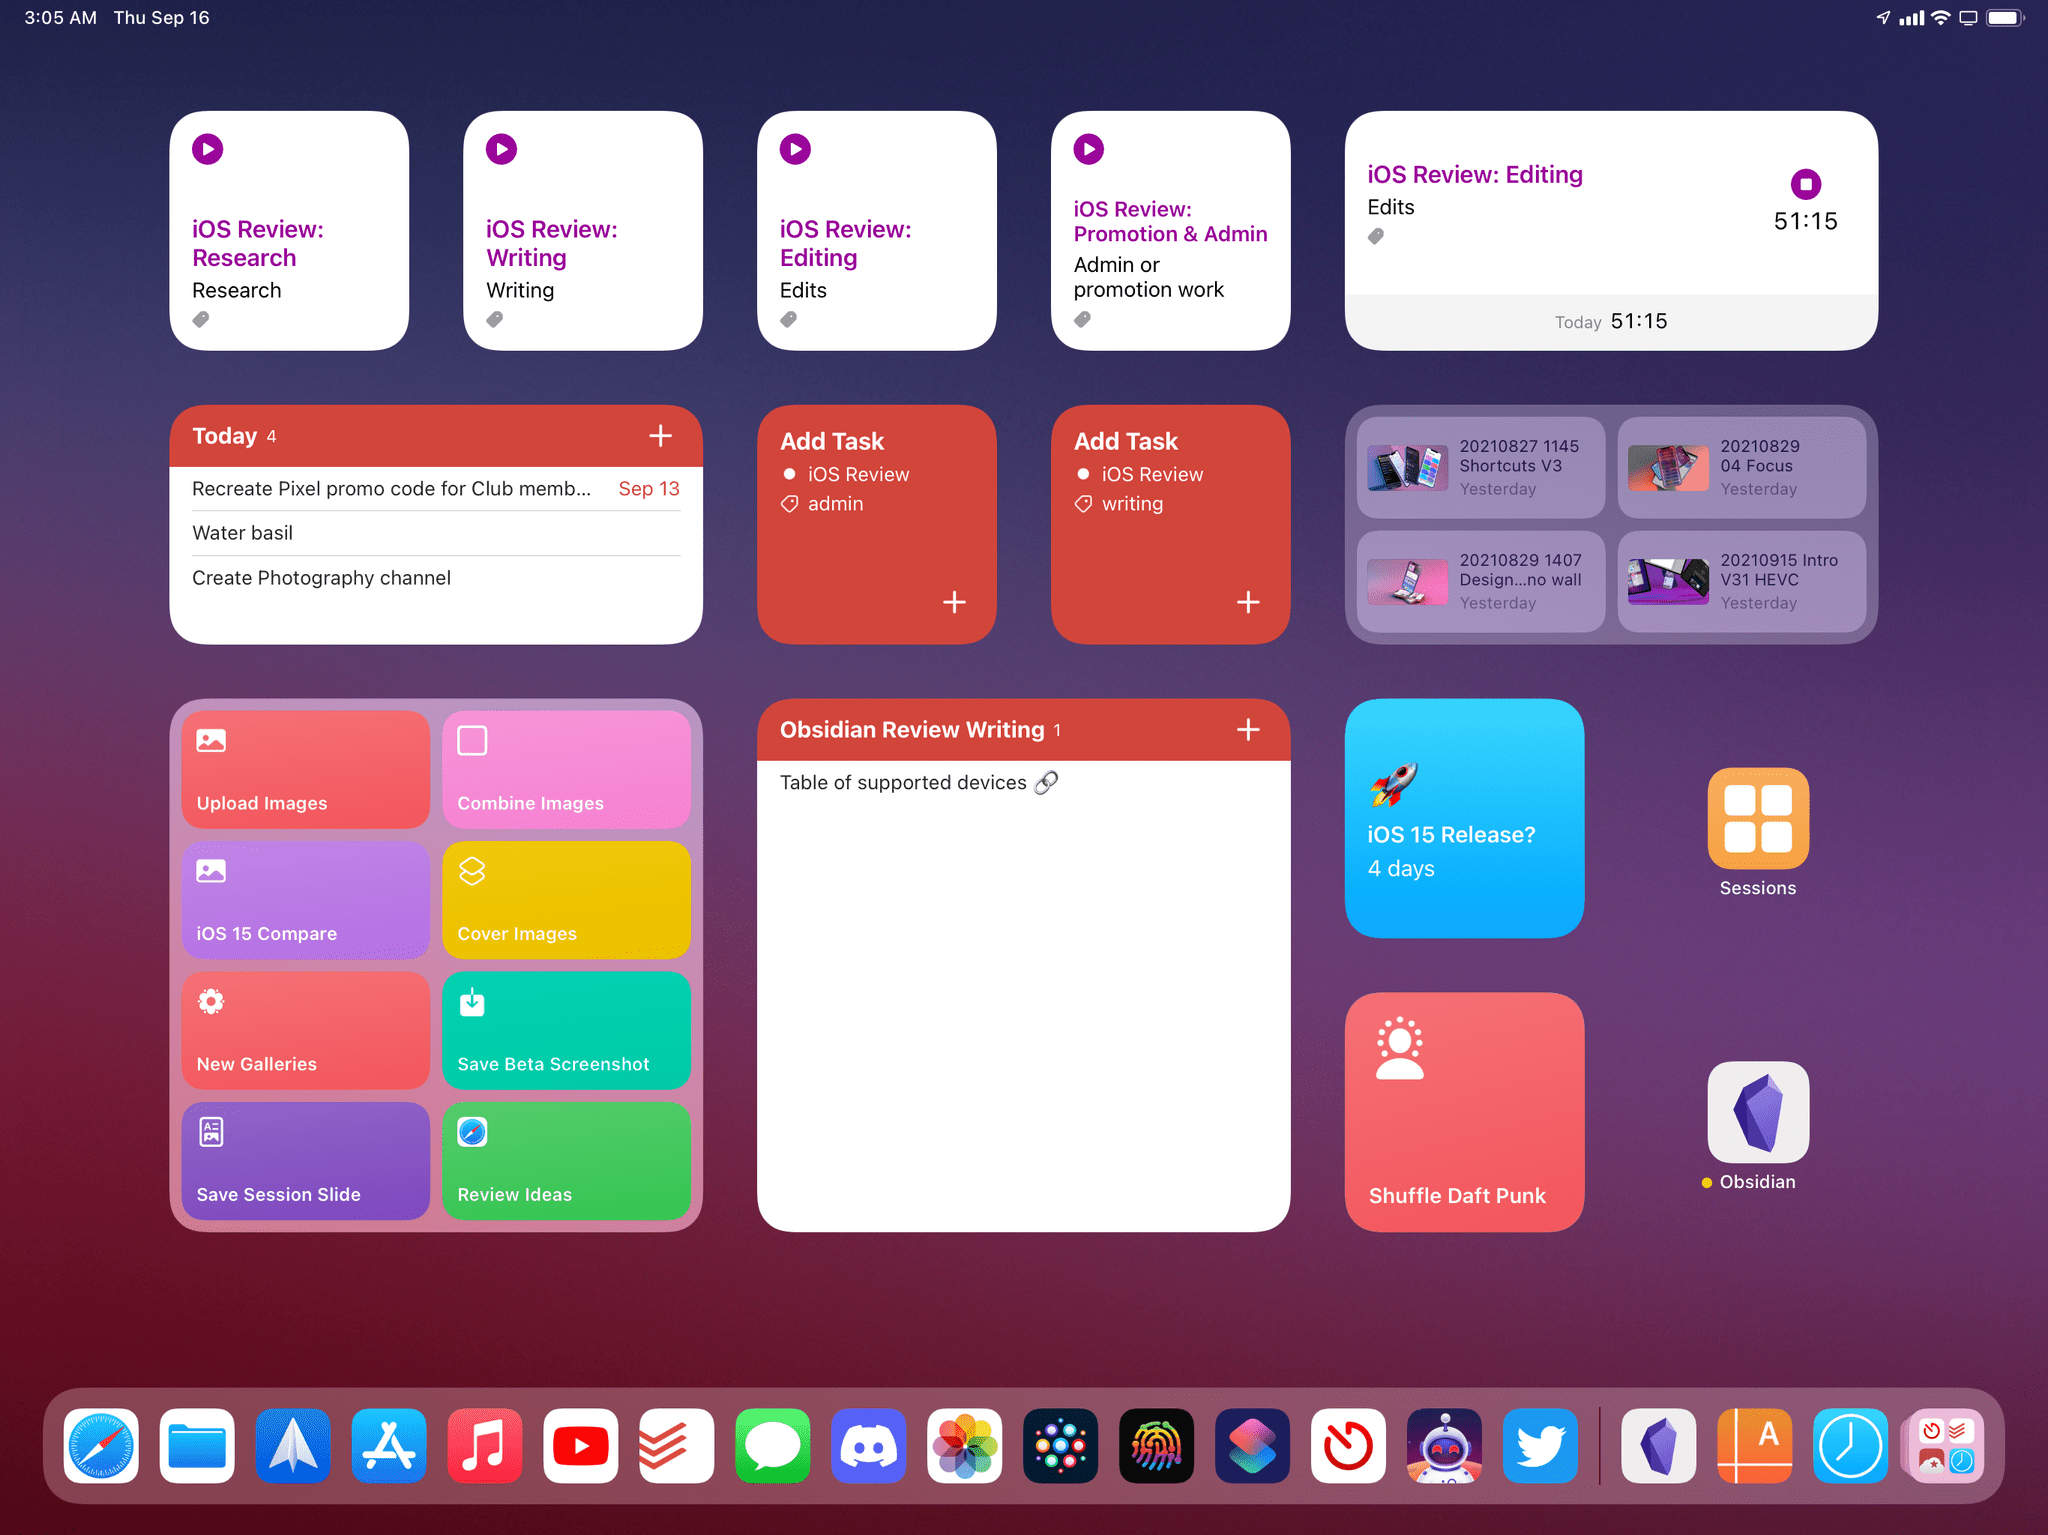 My iOS 15 review Home Screen.